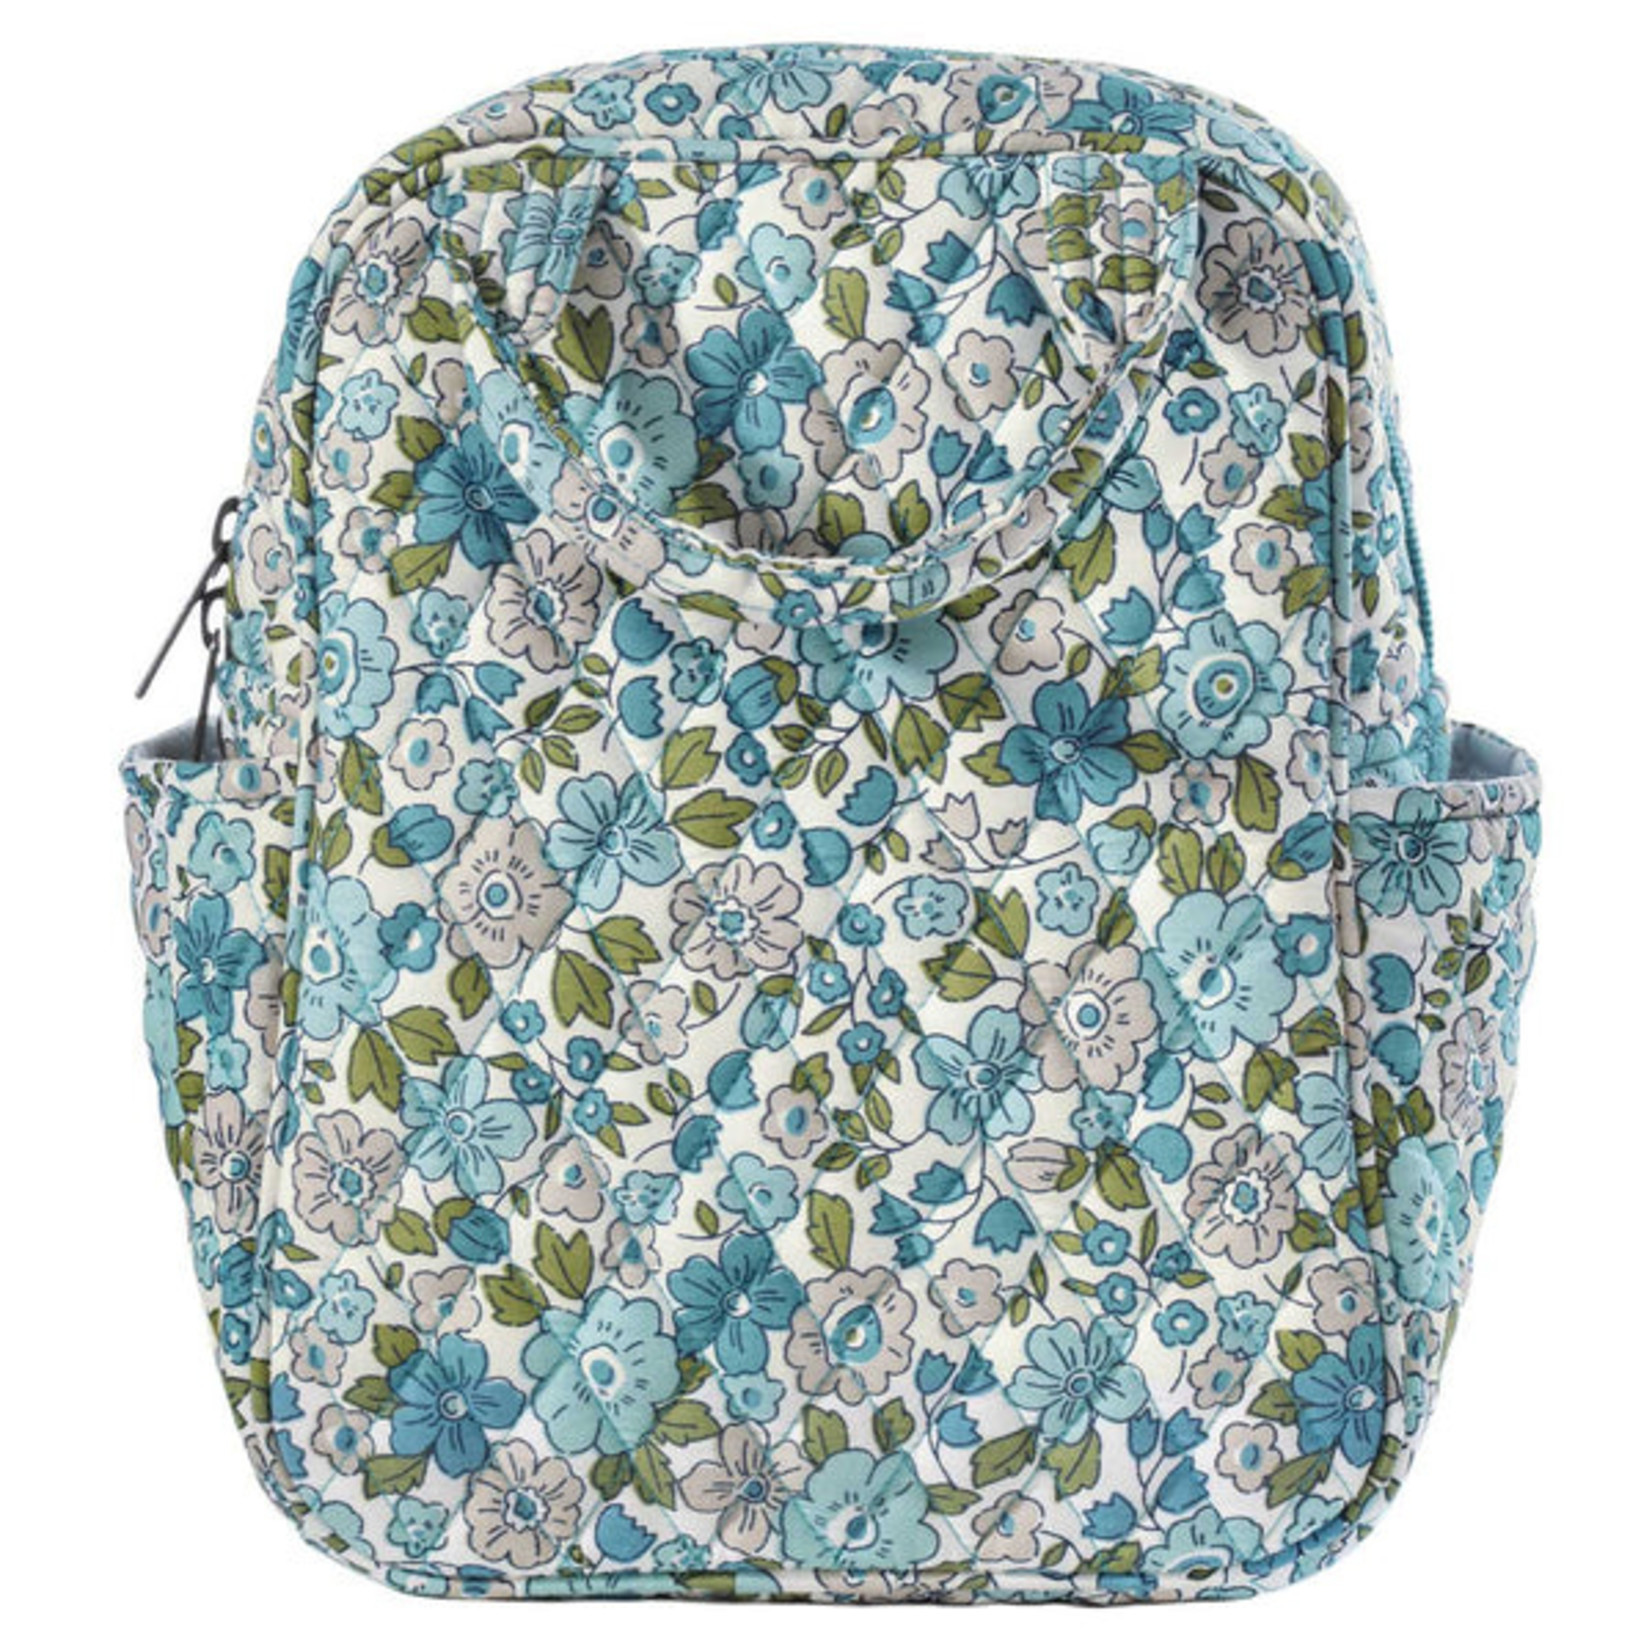 Bella Taylor Delicate Floral Blue - Lunch Tote